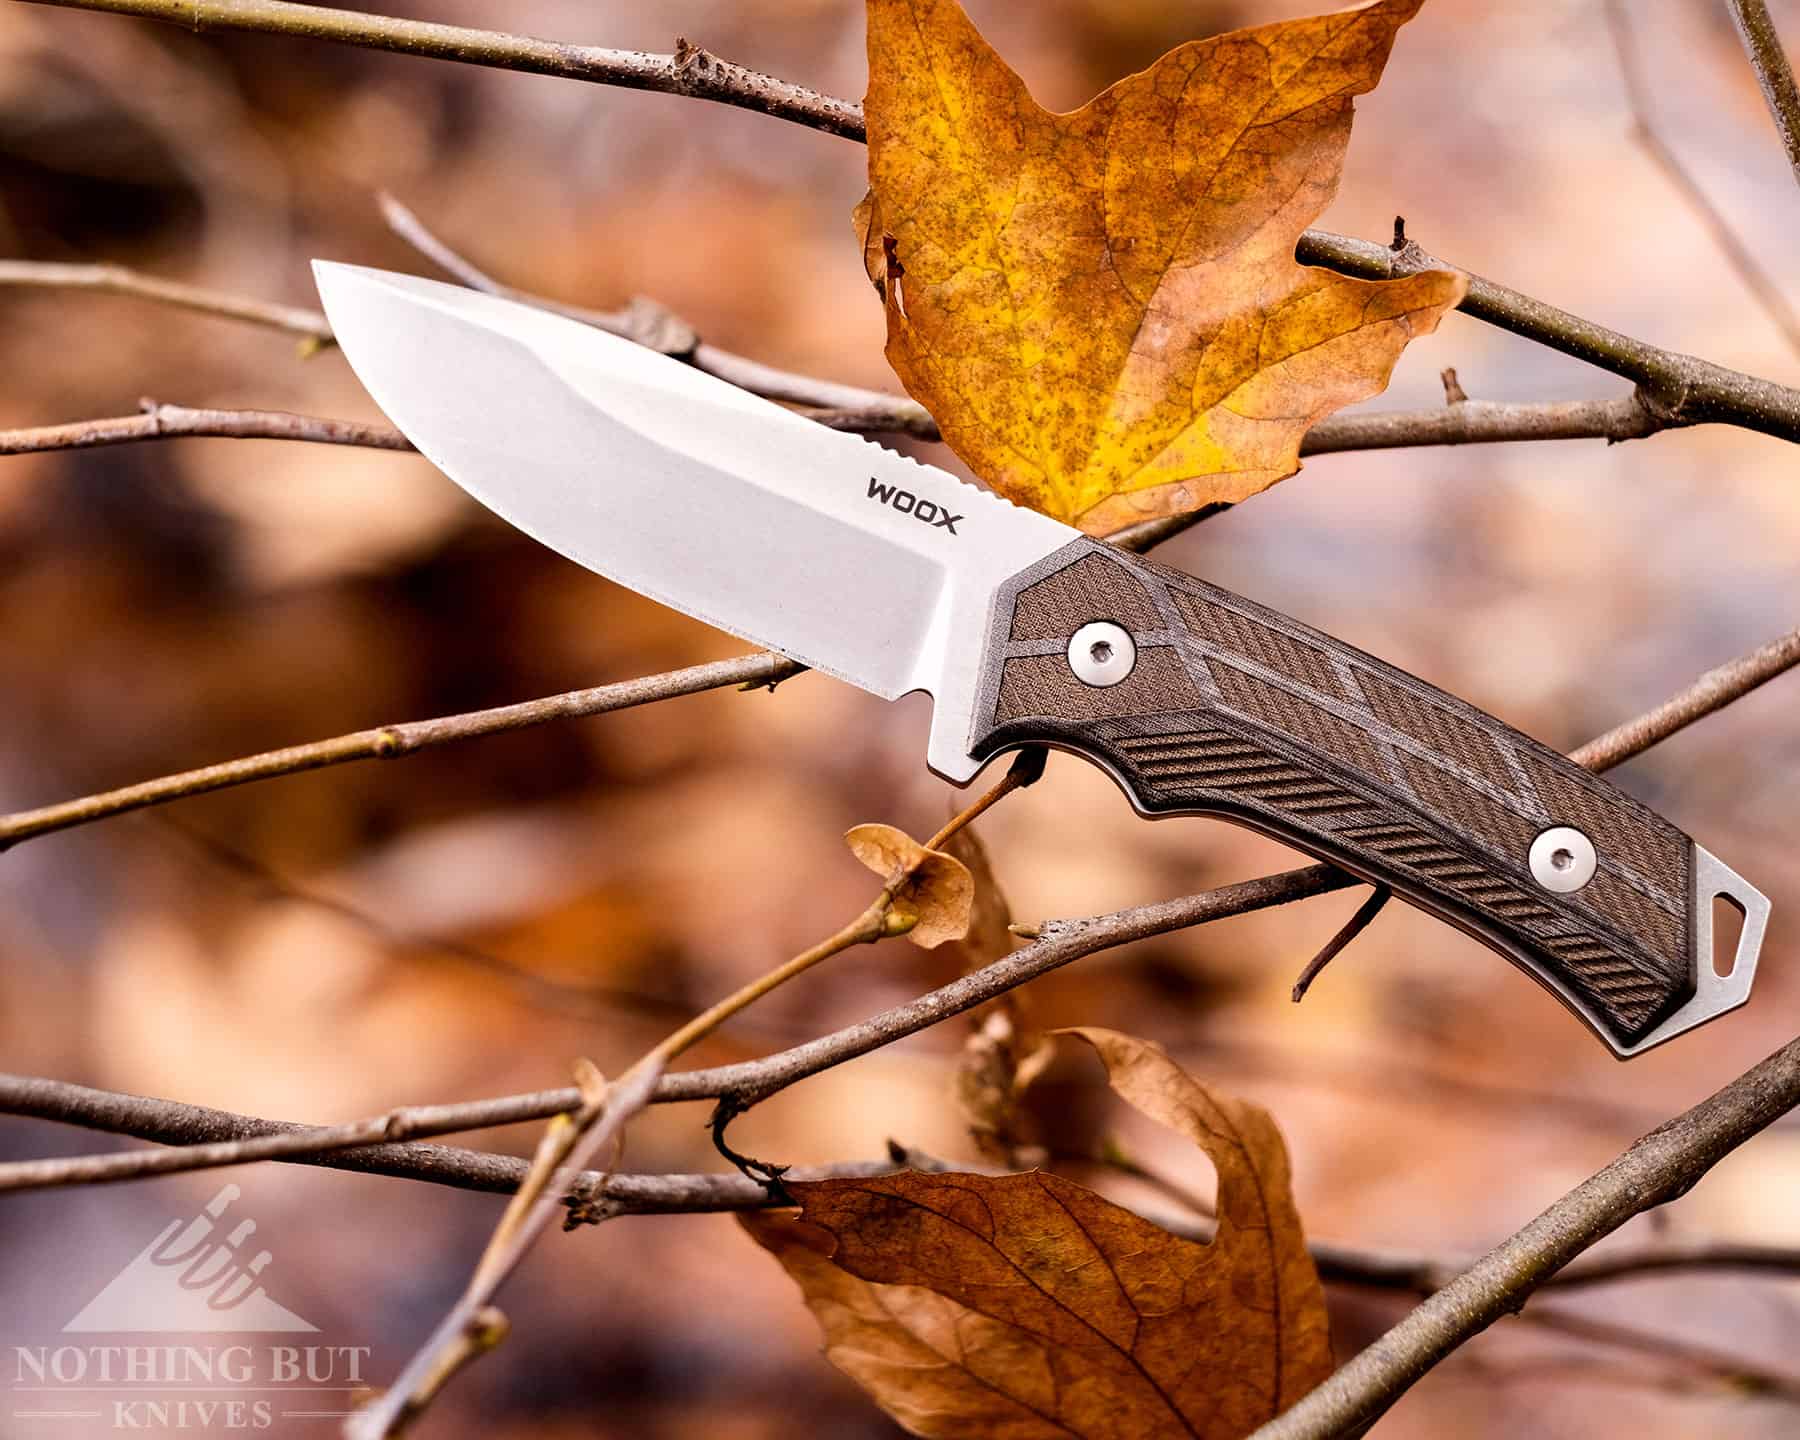 The Woox Rock 62 is a capable fixed blade survival knife. 